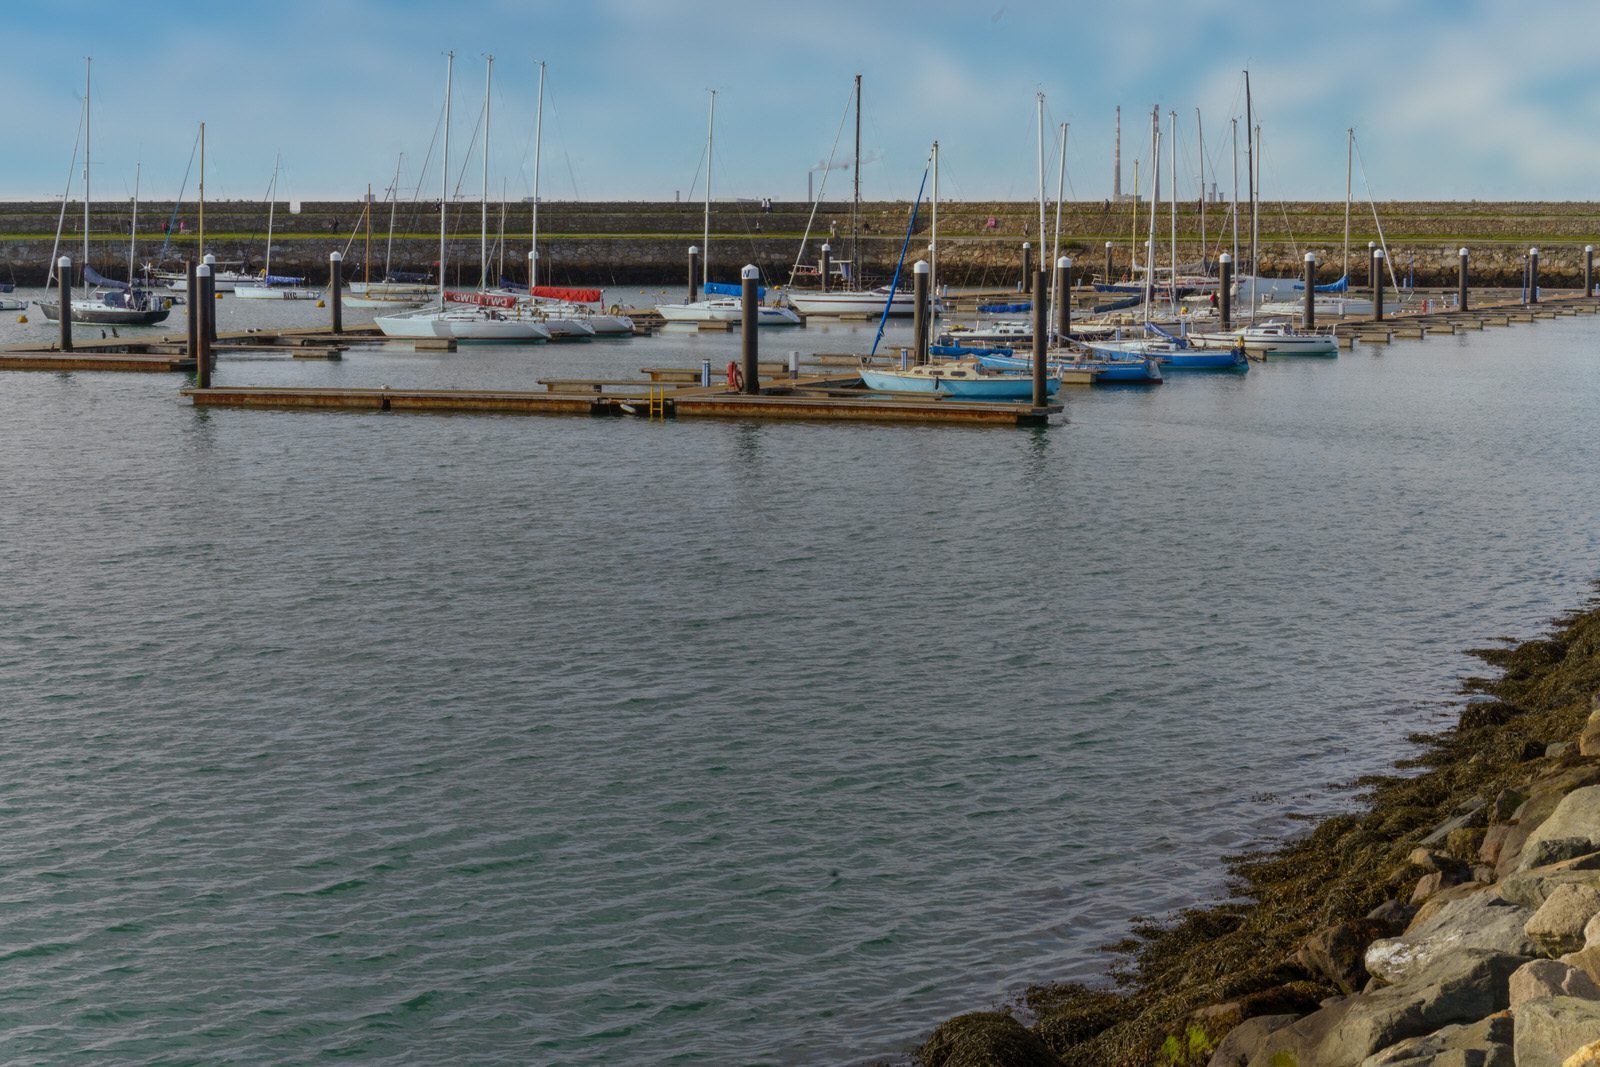 THE SECTION OF THE MARINA NEAR THE WESTERN BREAKWATER [DUN LAOGHAIRE HARBOUR] 010